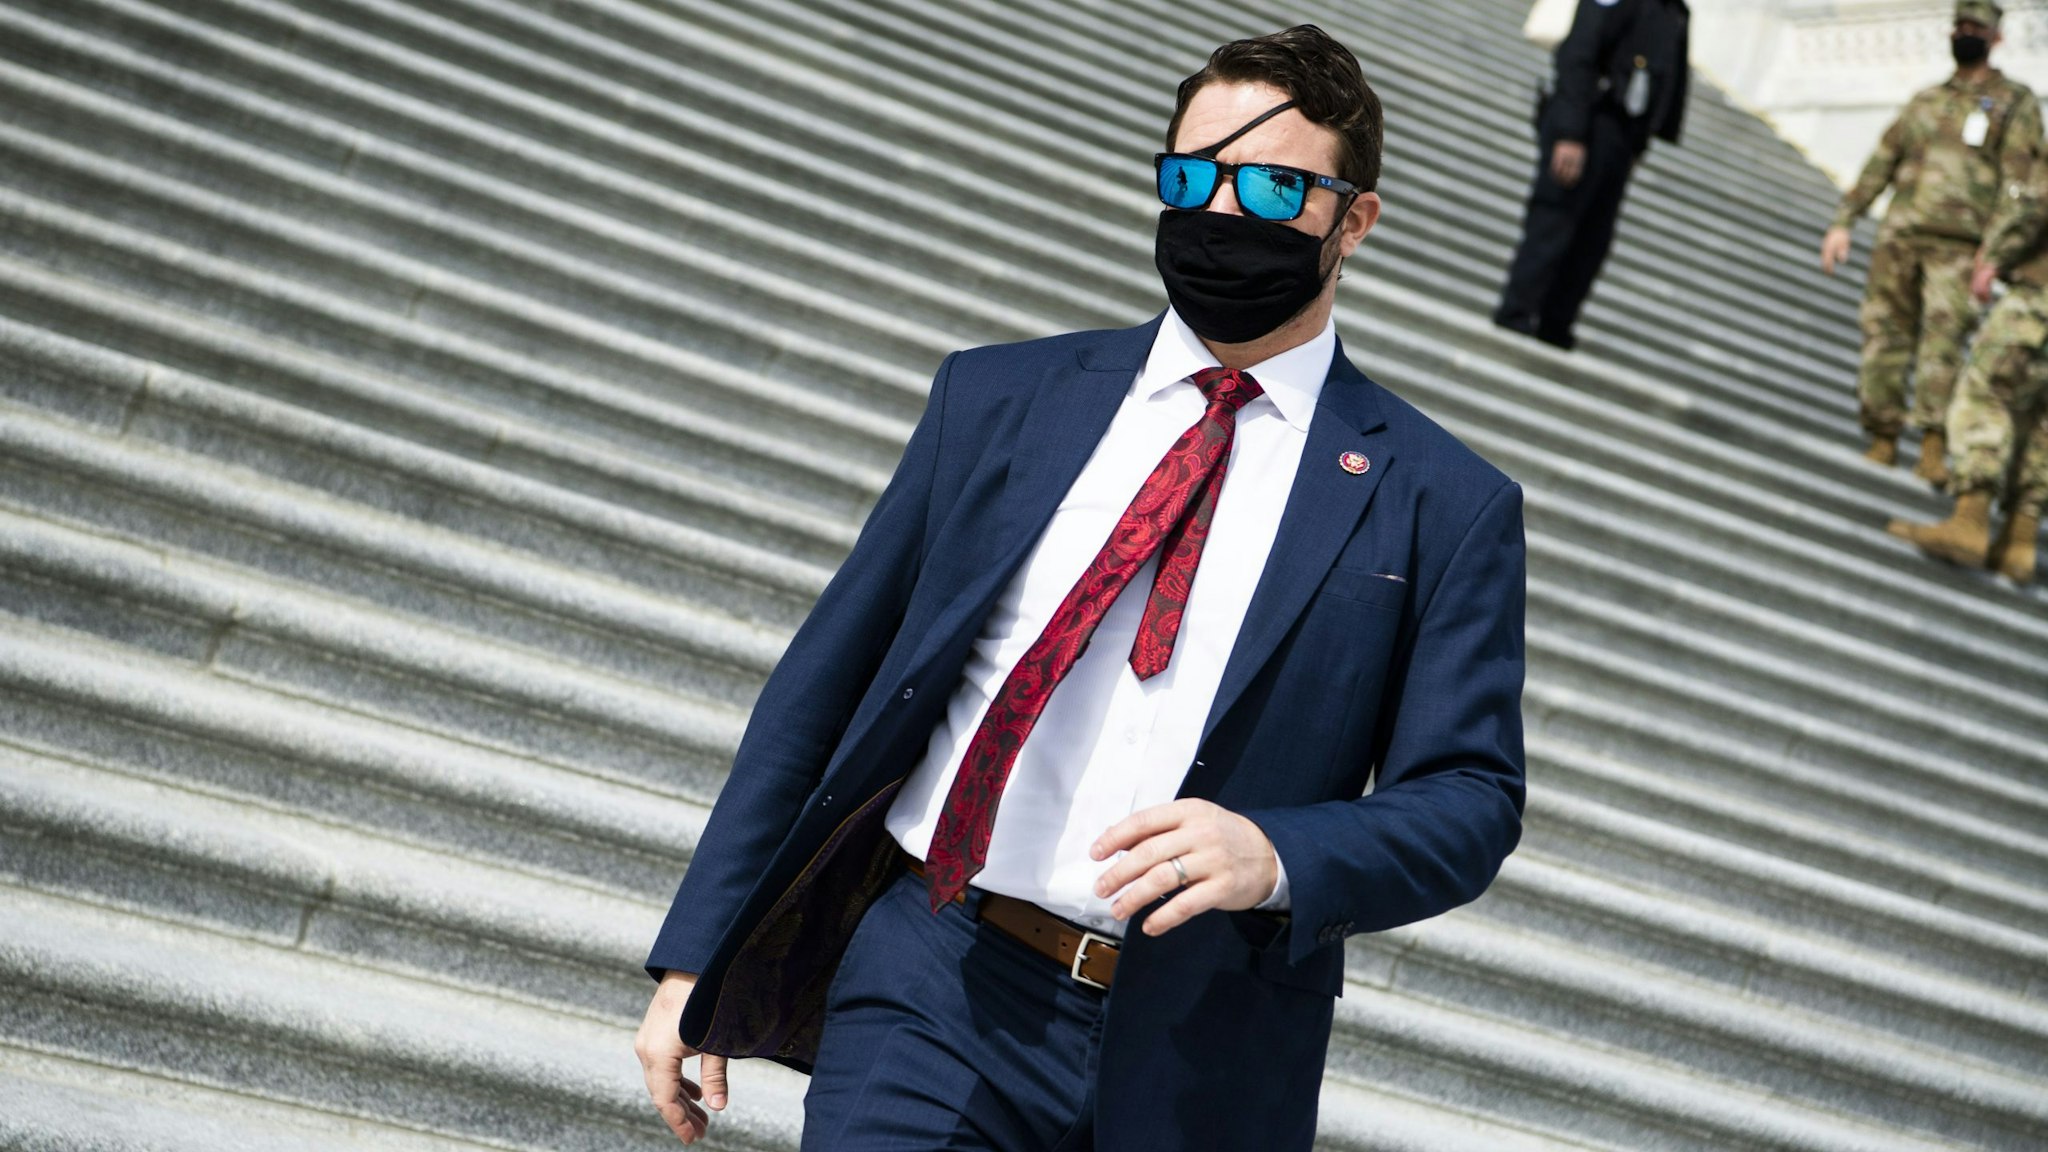 UNITED STATES - FEBRUARY 26: Rep. Dan Crenshaw, R-Texas, is seen outside the Capitol during a vote on the Protecting America's Wilderness and Public Lands Act, on Friday, February 26, 2021.